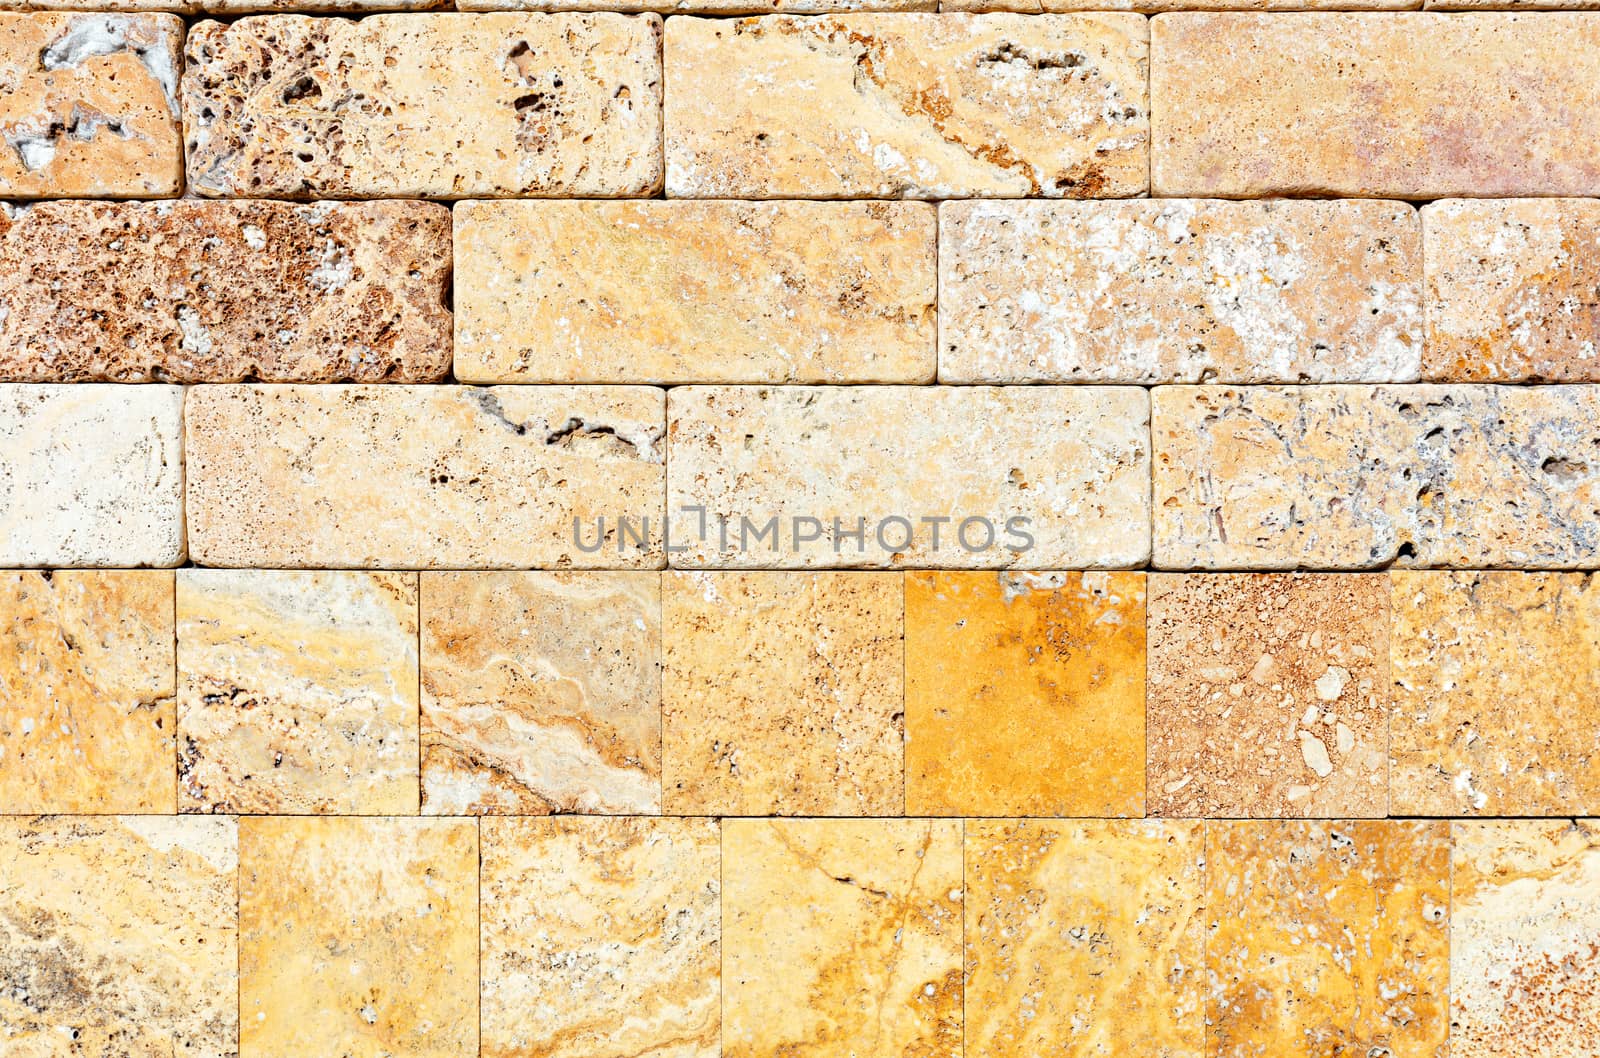 The wall is faced with hewn yellow shell stone. by Sergii